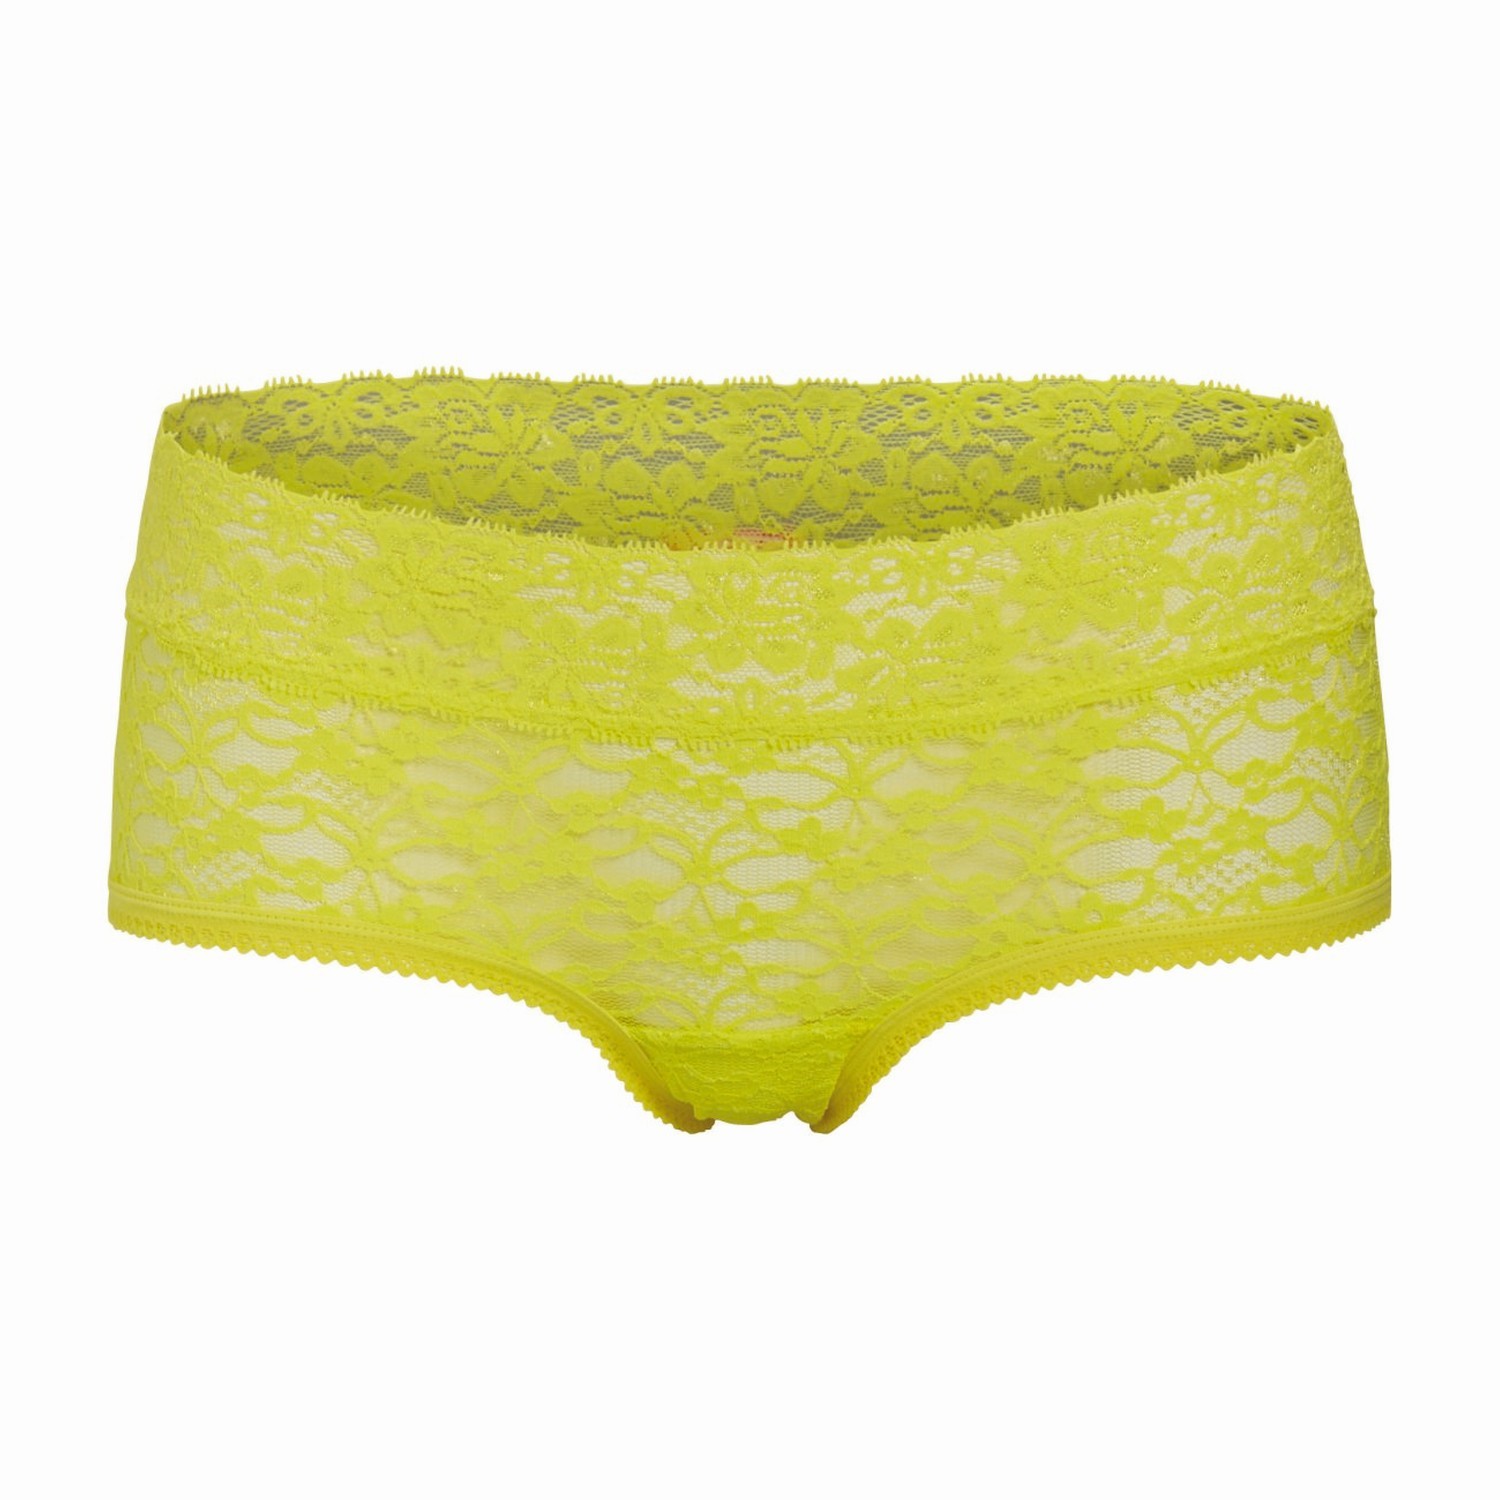 Björn Borg Love All Lace Hotpant 141184 Yellow